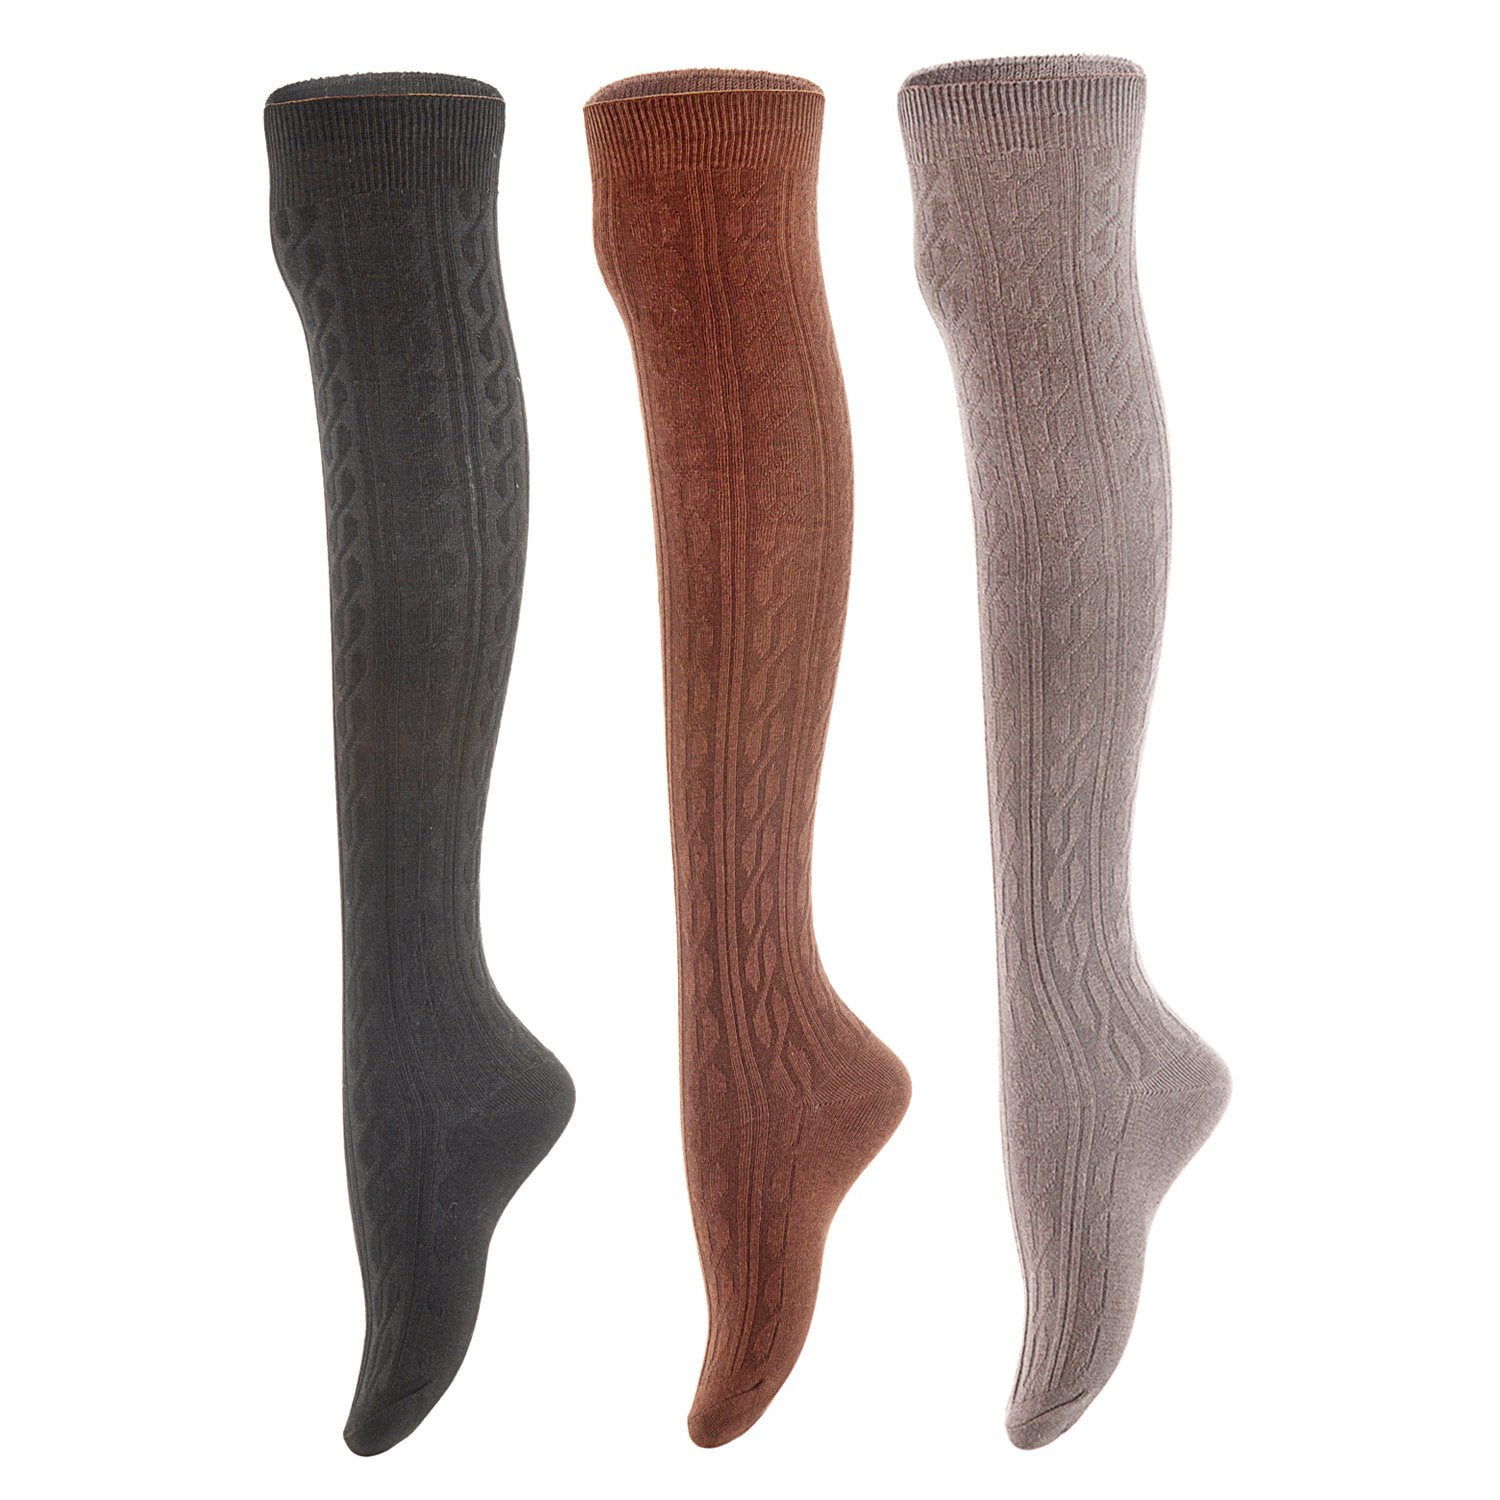 3 Pairs Awesome Women Thigh High Cotton Boot Socks. Durable Knee High ...